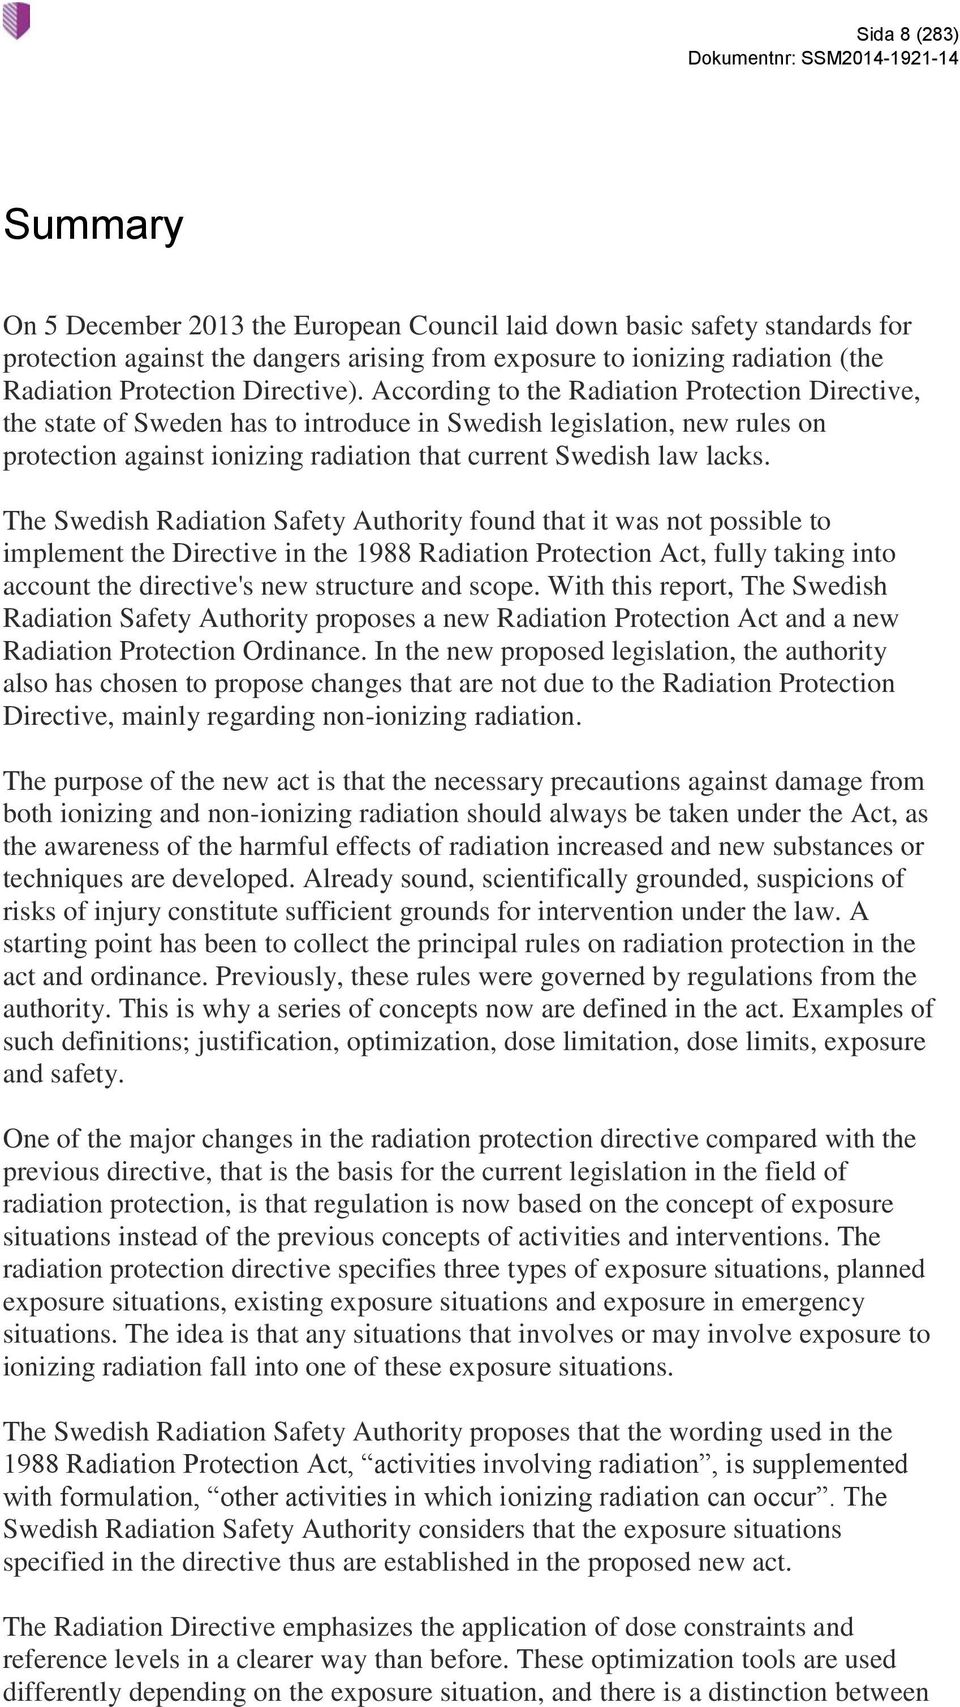 According to the Radiation Protection Directive, the state of Sweden has to introduce in Swedish legislation, new rules on protection against ionizing radiation that current Swedish law lacks.